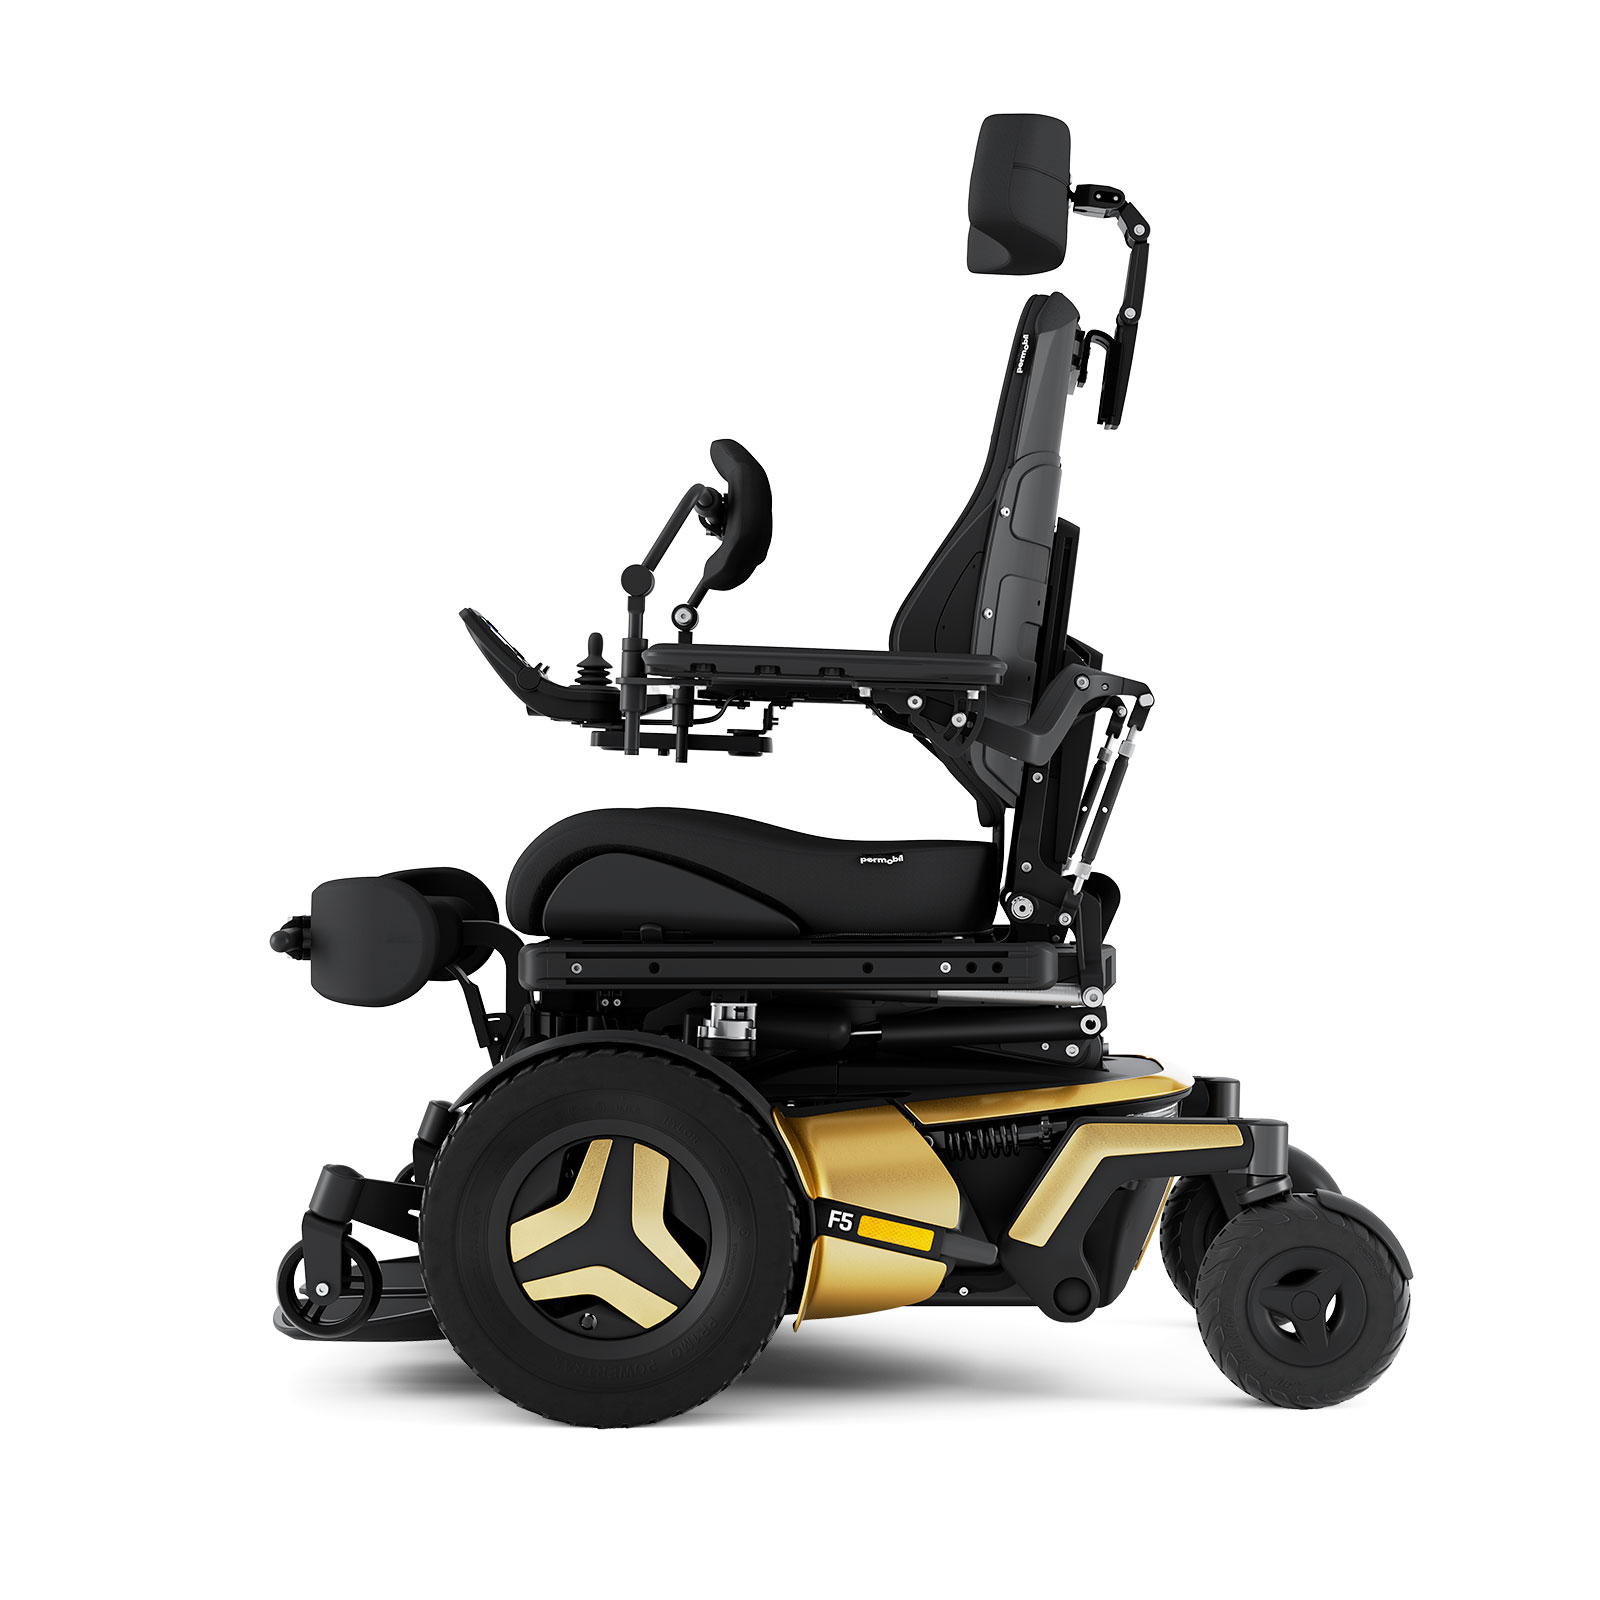 F5VS Corpus in gold in a standard seating position standing powerchair in suffolk